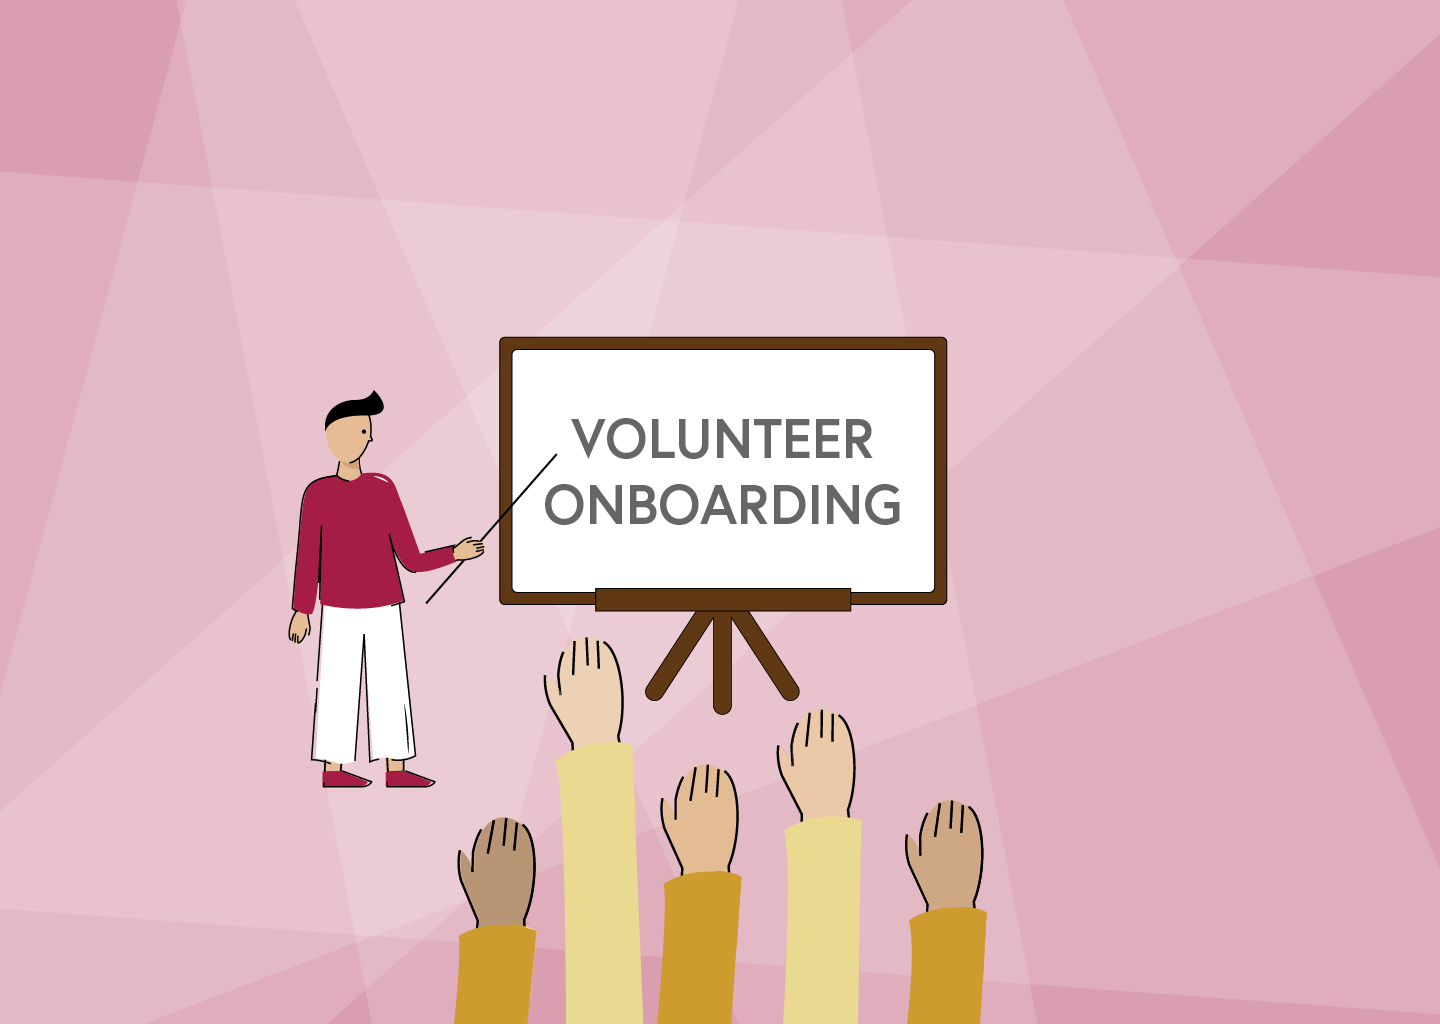 7 Reasons Why You Need a Volunteer Onboarding Process